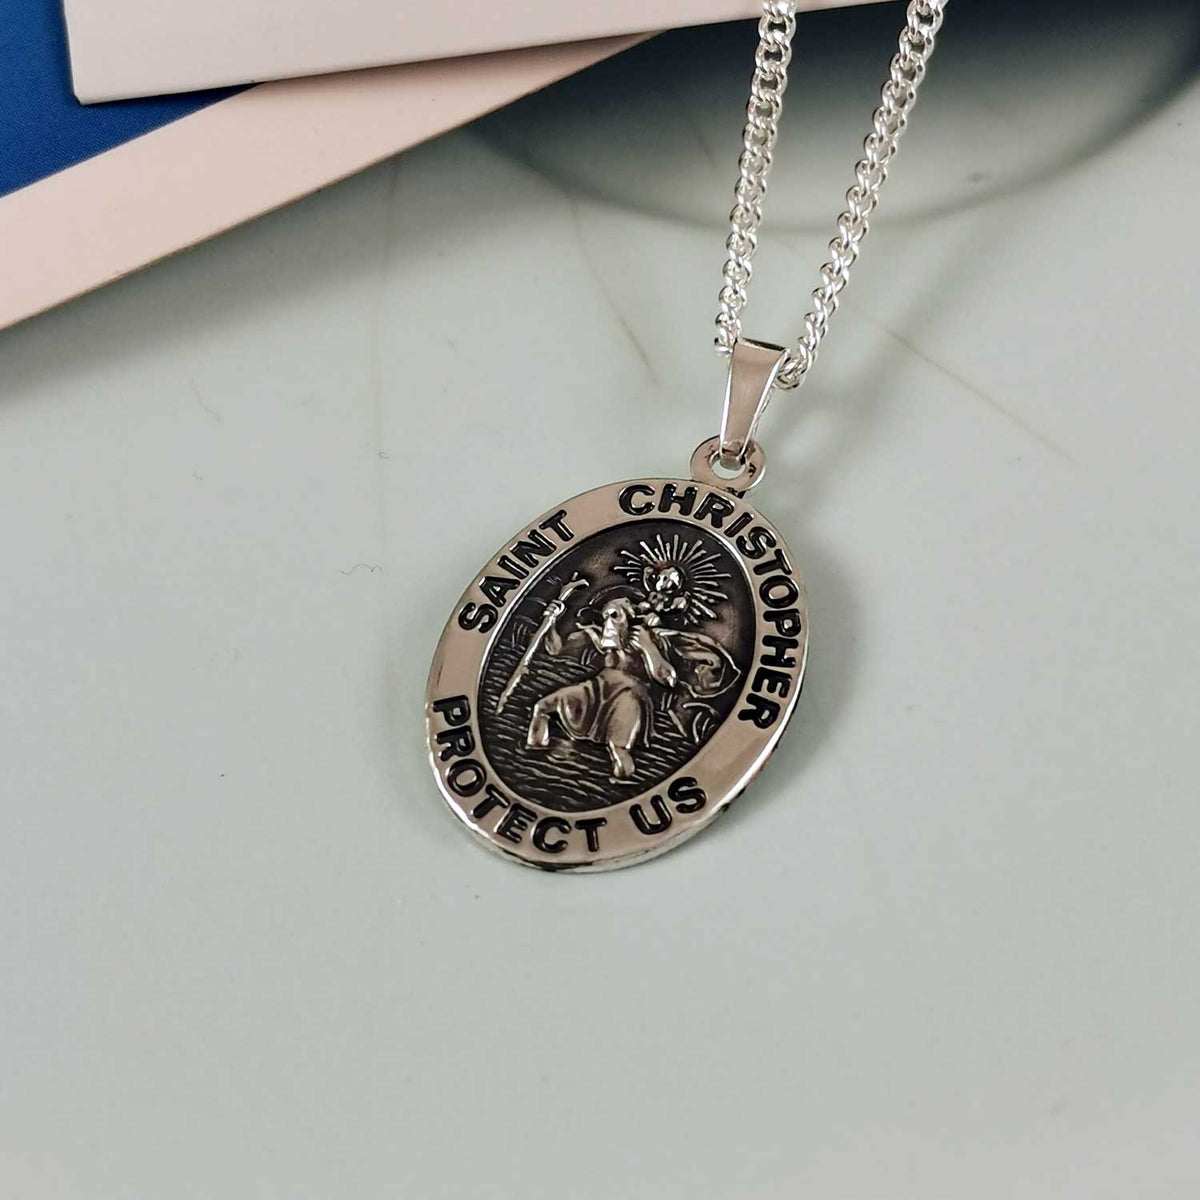 Saint Christopher Protect Us Personalised Silver Necklace